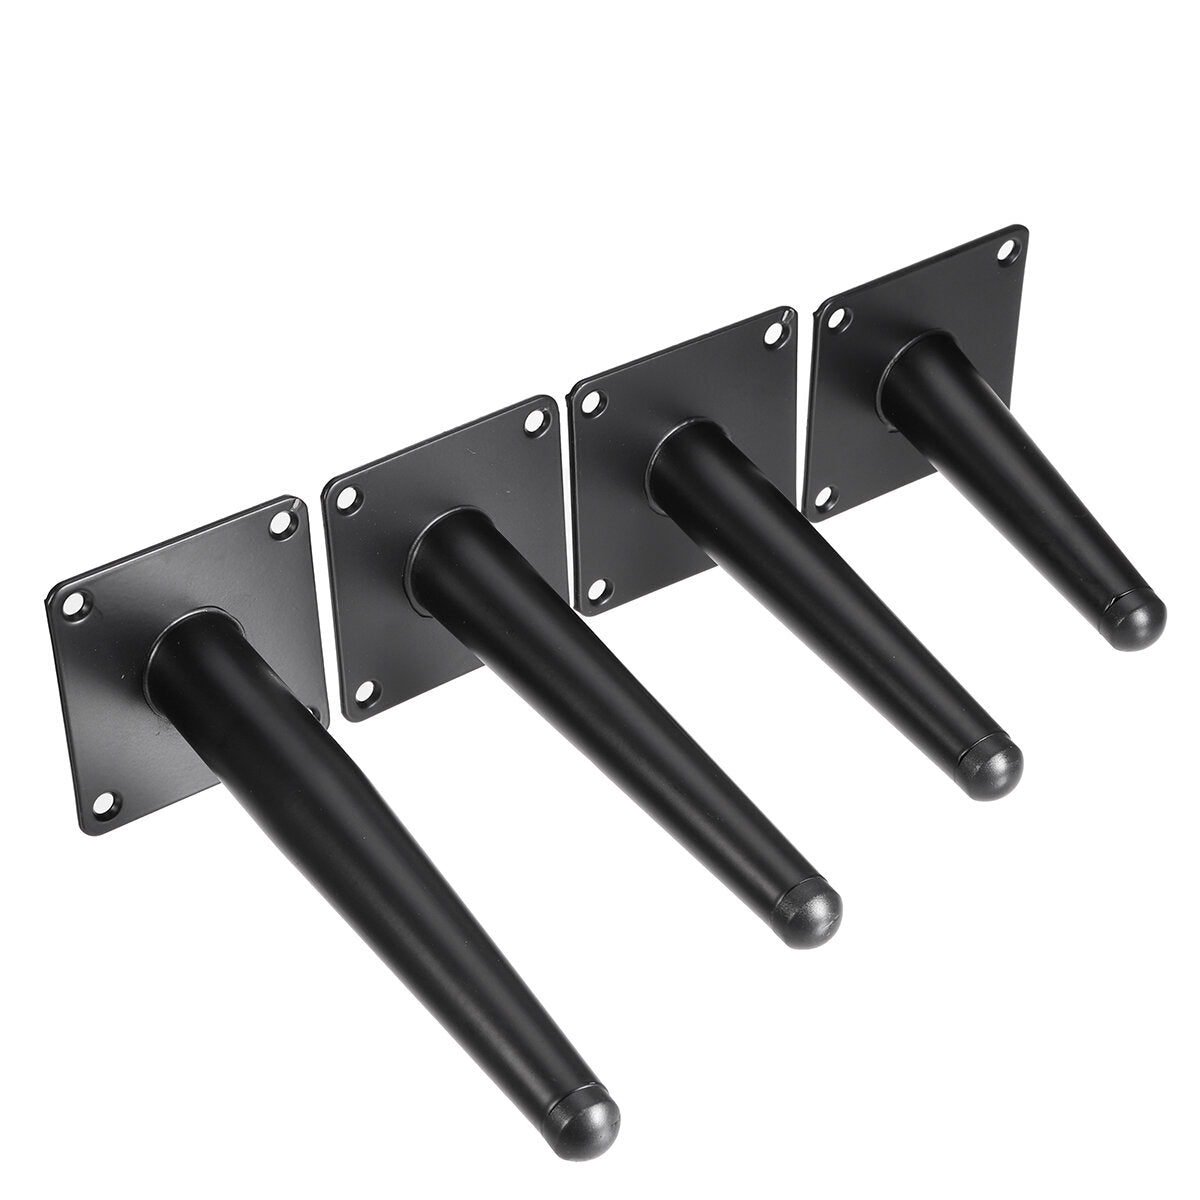 4Pcs Iron Legs Home Living Room Furniture Cabinet Support Legs Sofa Chair Bedroom Part Kit